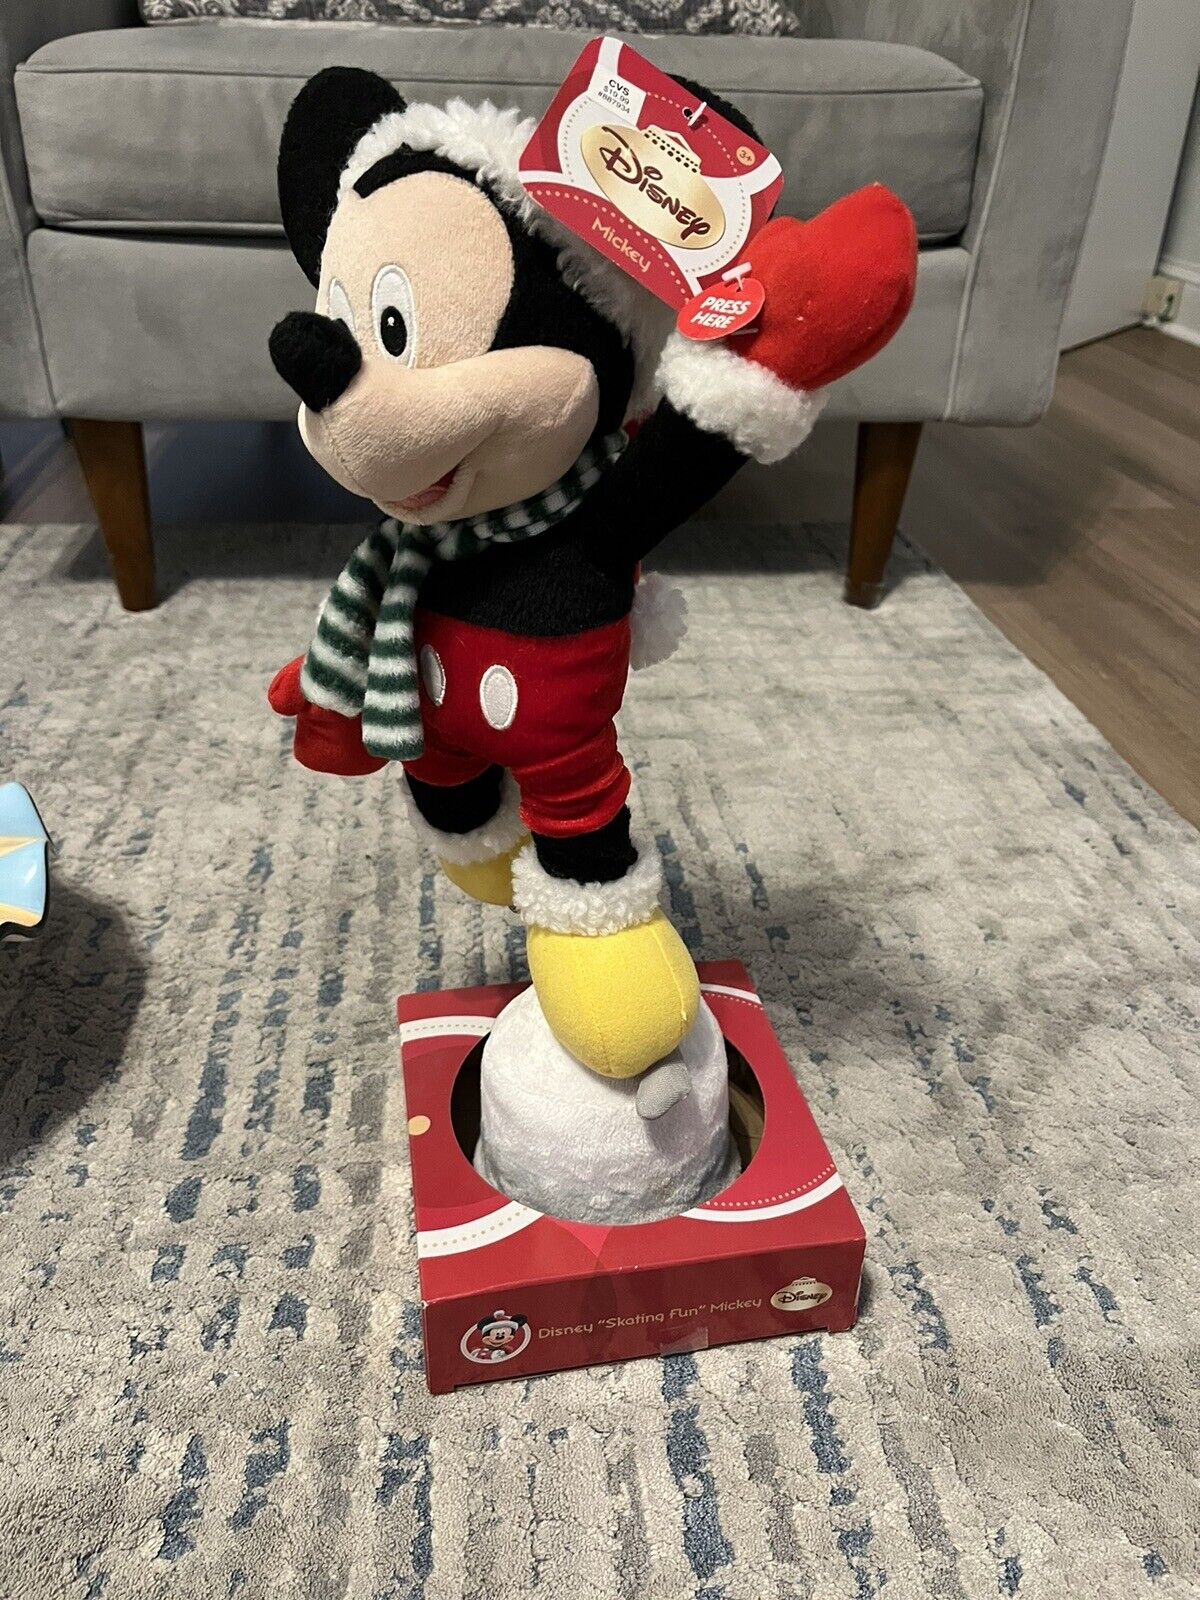 VTG Musical Mickey Mouse on Ice Skates Plays Songs Squeeze Hand to Play New CVS